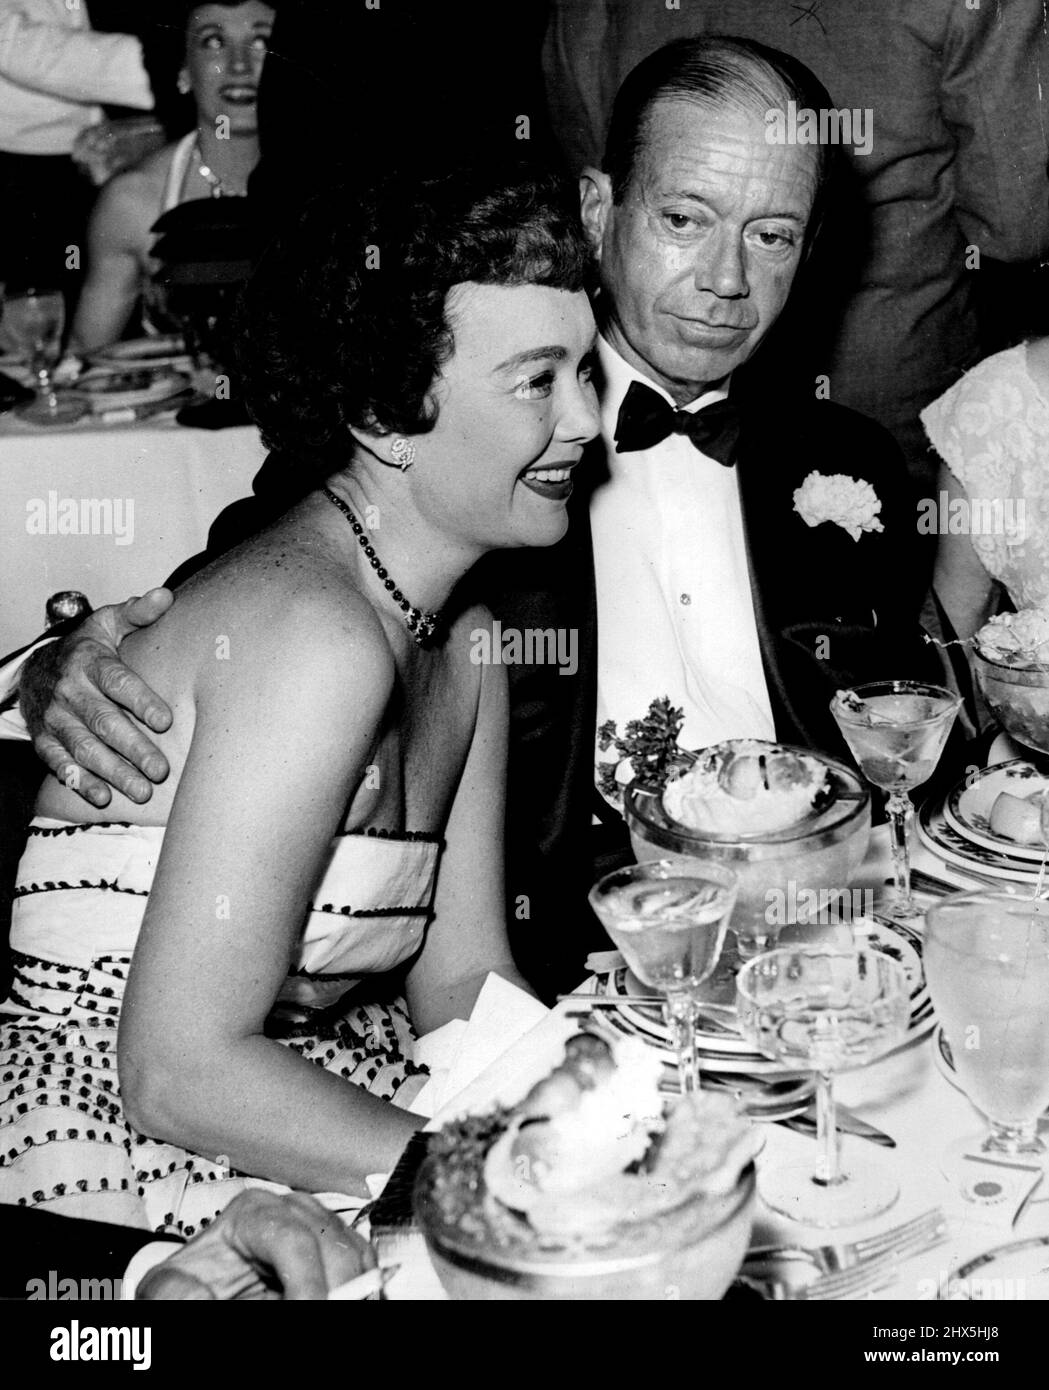 Cole Porter, composer of more than 300 songs, who died on Friday, was one of the most debonair playboys in the Western World. Cole Porter dines with actress Jane Wyman in New York. In the roaring twenties he kept a villa in Bavaria, a palazzo in Venice, a flat in London, a house in Paris and threw the most fabulous parties in Europe. In Venice he once hired an entire ballet company to dance again a background ***** are just as elegant and precise and the food beautifully served, and Cole always wears his usual boutonniere, a white carnation. 'No matter what happens this sense of beauty is Stock Photo